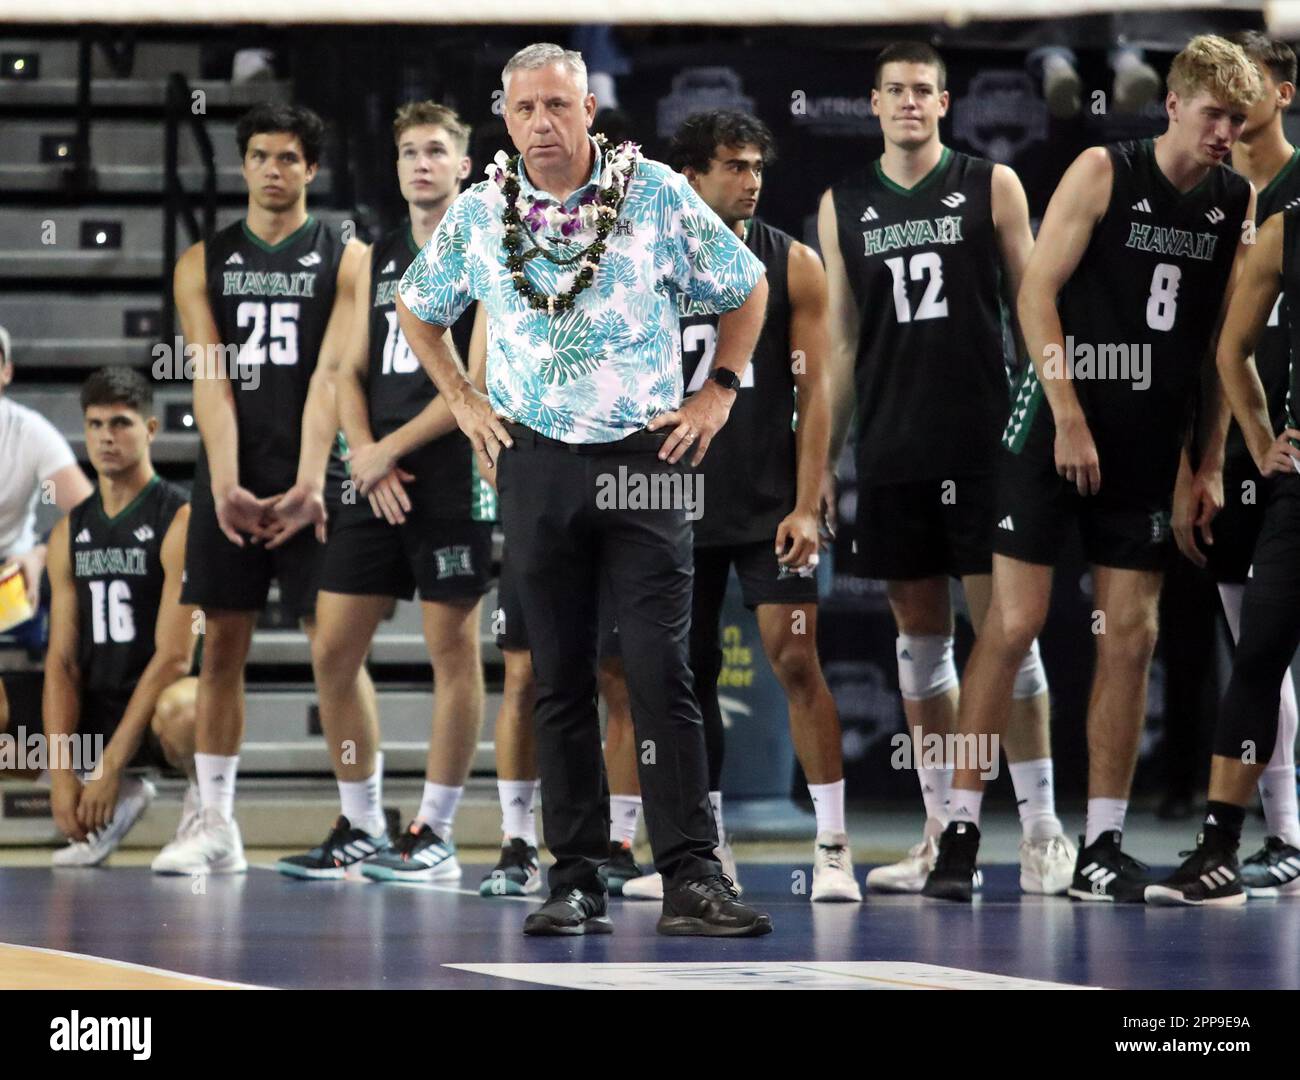 April 22, 2023 - head coach Charlie Wade looks on during the Big West Conference Championship match between the UC Irvine Anteaters and the Hawaii Rainbow Warriors at the Bren Events Center in Irvine, CA - Michael Sullivan/CSM Stock Photo